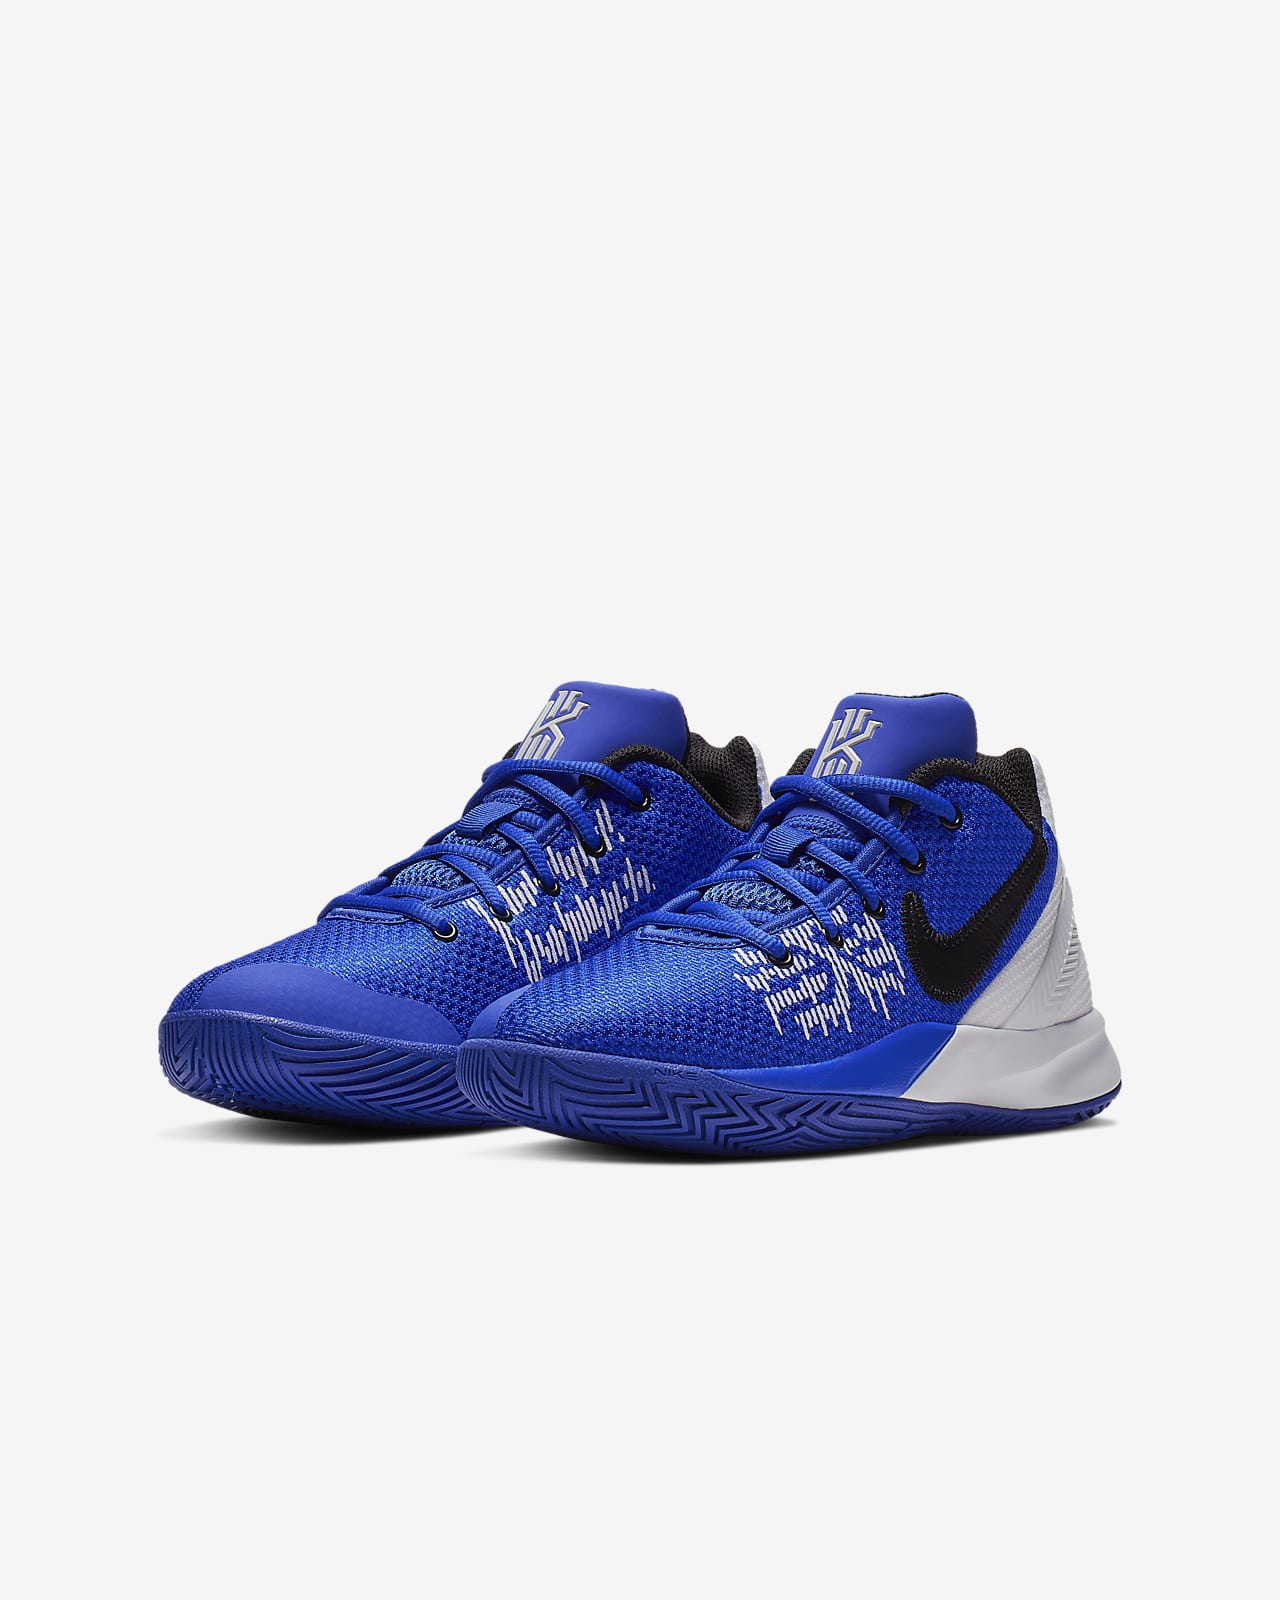 nike kyrie flytrap youth